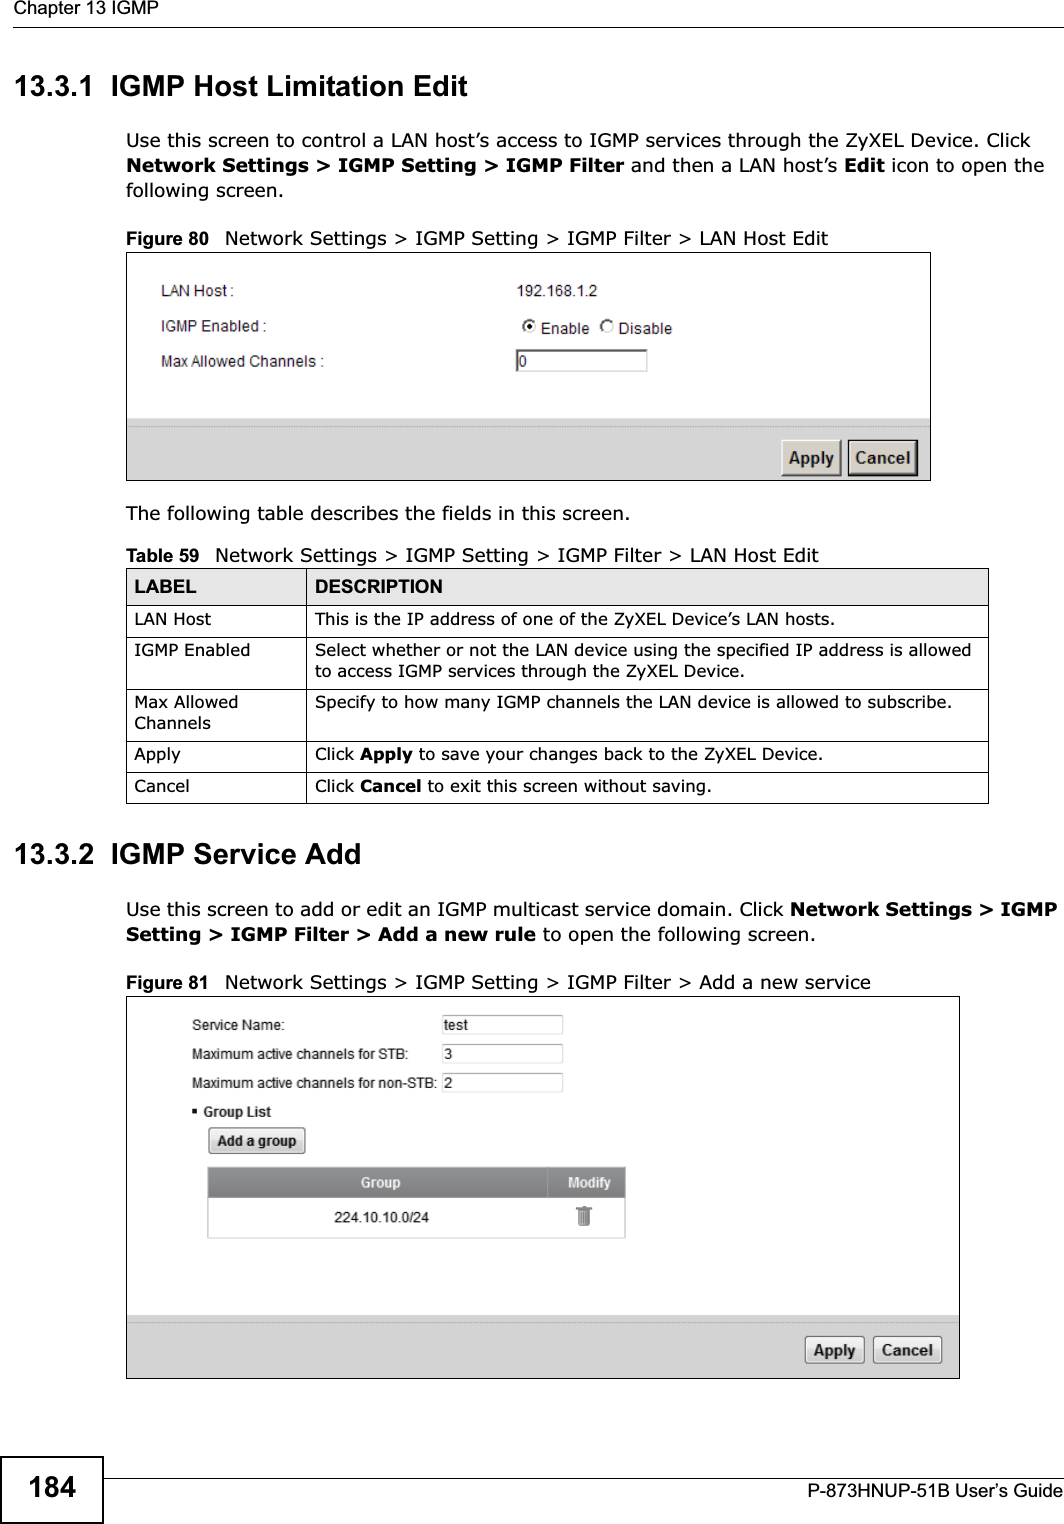 Chapter 13 IGMPP-873HNUP-51B User’s Guide18413.3.1  IGMP Host Limitation EditUse this screen to control a LAN host’s access to IGMP services through the ZyXEL Device. Click Network Settings &gt; IGMP Setting &gt; IGMP Filter and then a LAN host’s Edit icon to open the following screen. Figure 80   Network Settings &gt; IGMP Setting &gt; IGMP Filter &gt; LAN Host Edit  The following table describes the fields in this screen.13.3.2  IGMP Service AddUse this screen to add or edit an IGMP multicast service domain. Click Network Settings &gt; IGMP Setting &gt; IGMP Filter &gt; Add a new rule to open the following screen. Figure 81   Network Settings &gt; IGMP Setting &gt; IGMP Filter &gt; Add a new service  Table 59   Network Settings &gt; IGMP Setting &gt; IGMP Filter &gt; LAN Host EditLABEL DESCRIPTIONLAN Host This is the IP address of one of the ZyXEL Device’s LAN hosts.IGMP Enabled Select whether or not the LAN device using the specified IP address is allowed to access IGMP services through the ZyXEL Device.Max Allowed ChannelsSpecify to how many IGMP channels the LAN device is allowed to subscribe.Apply Click Apply to save your changes back to the ZyXEL Device.Cancel Click Cancel to exit this screen without saving.